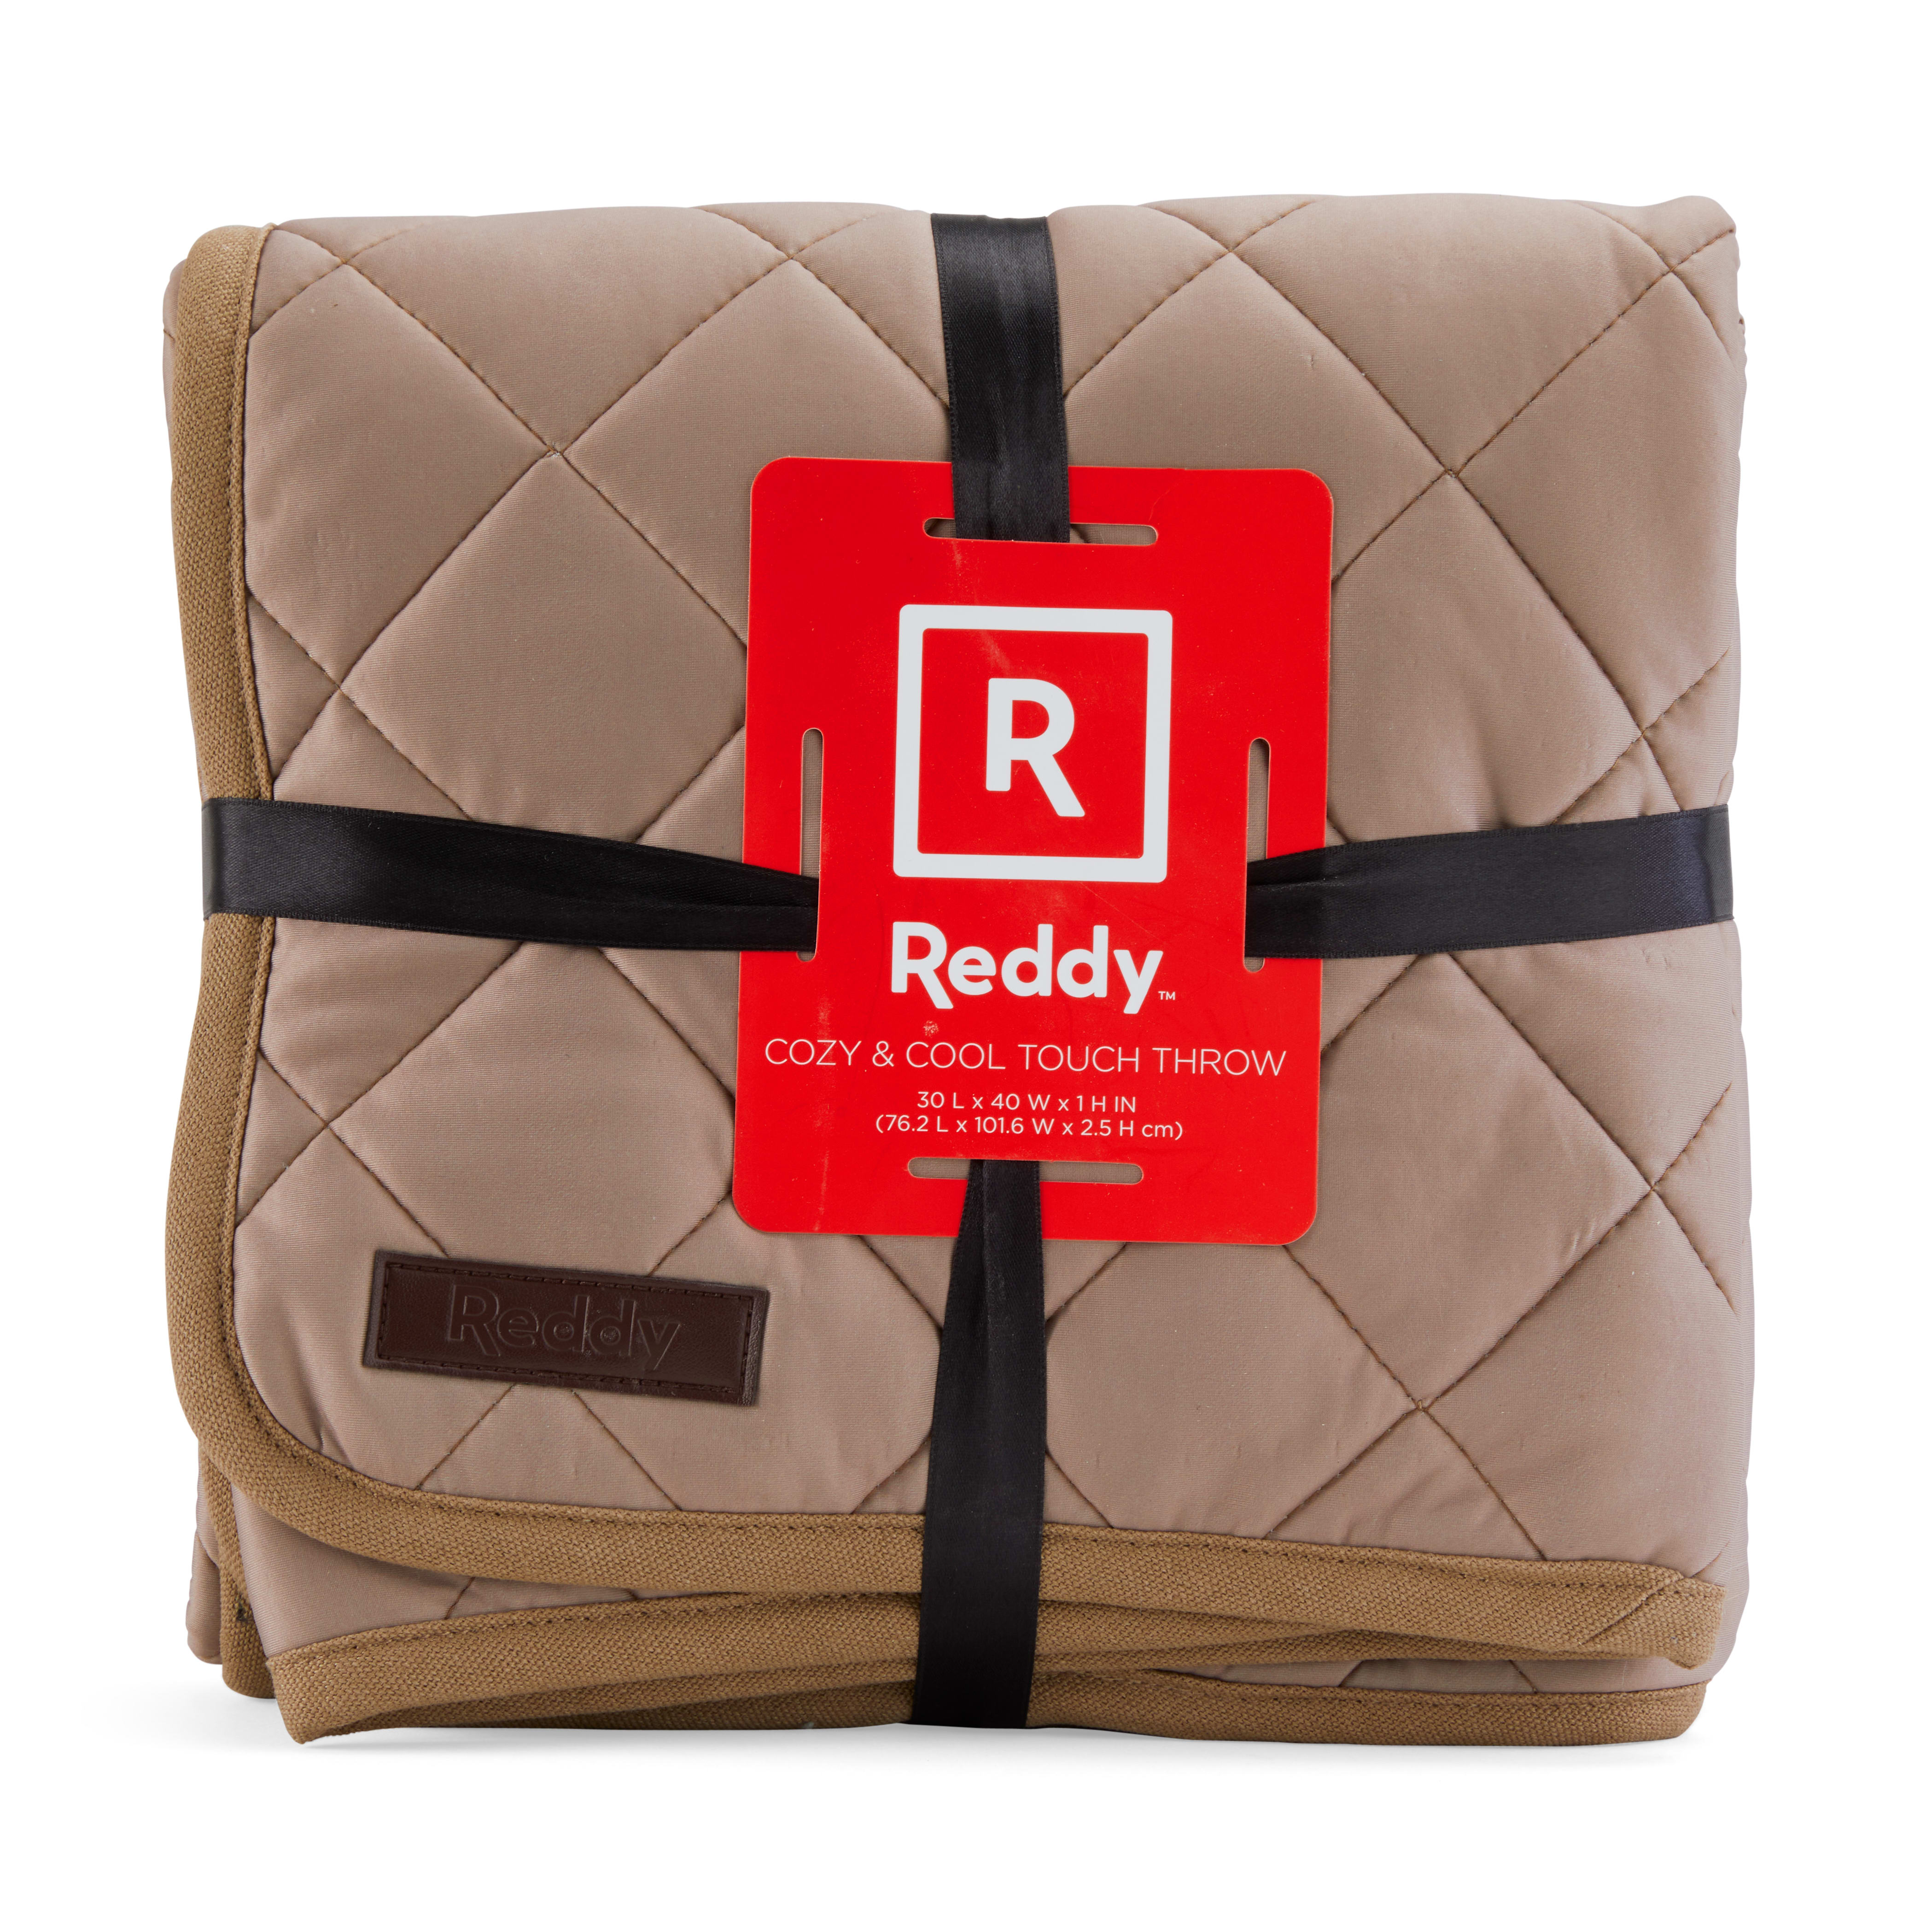 Reddy Cozy & Cool Touch Throw for Dogs, 30 L X 40 W, Tan